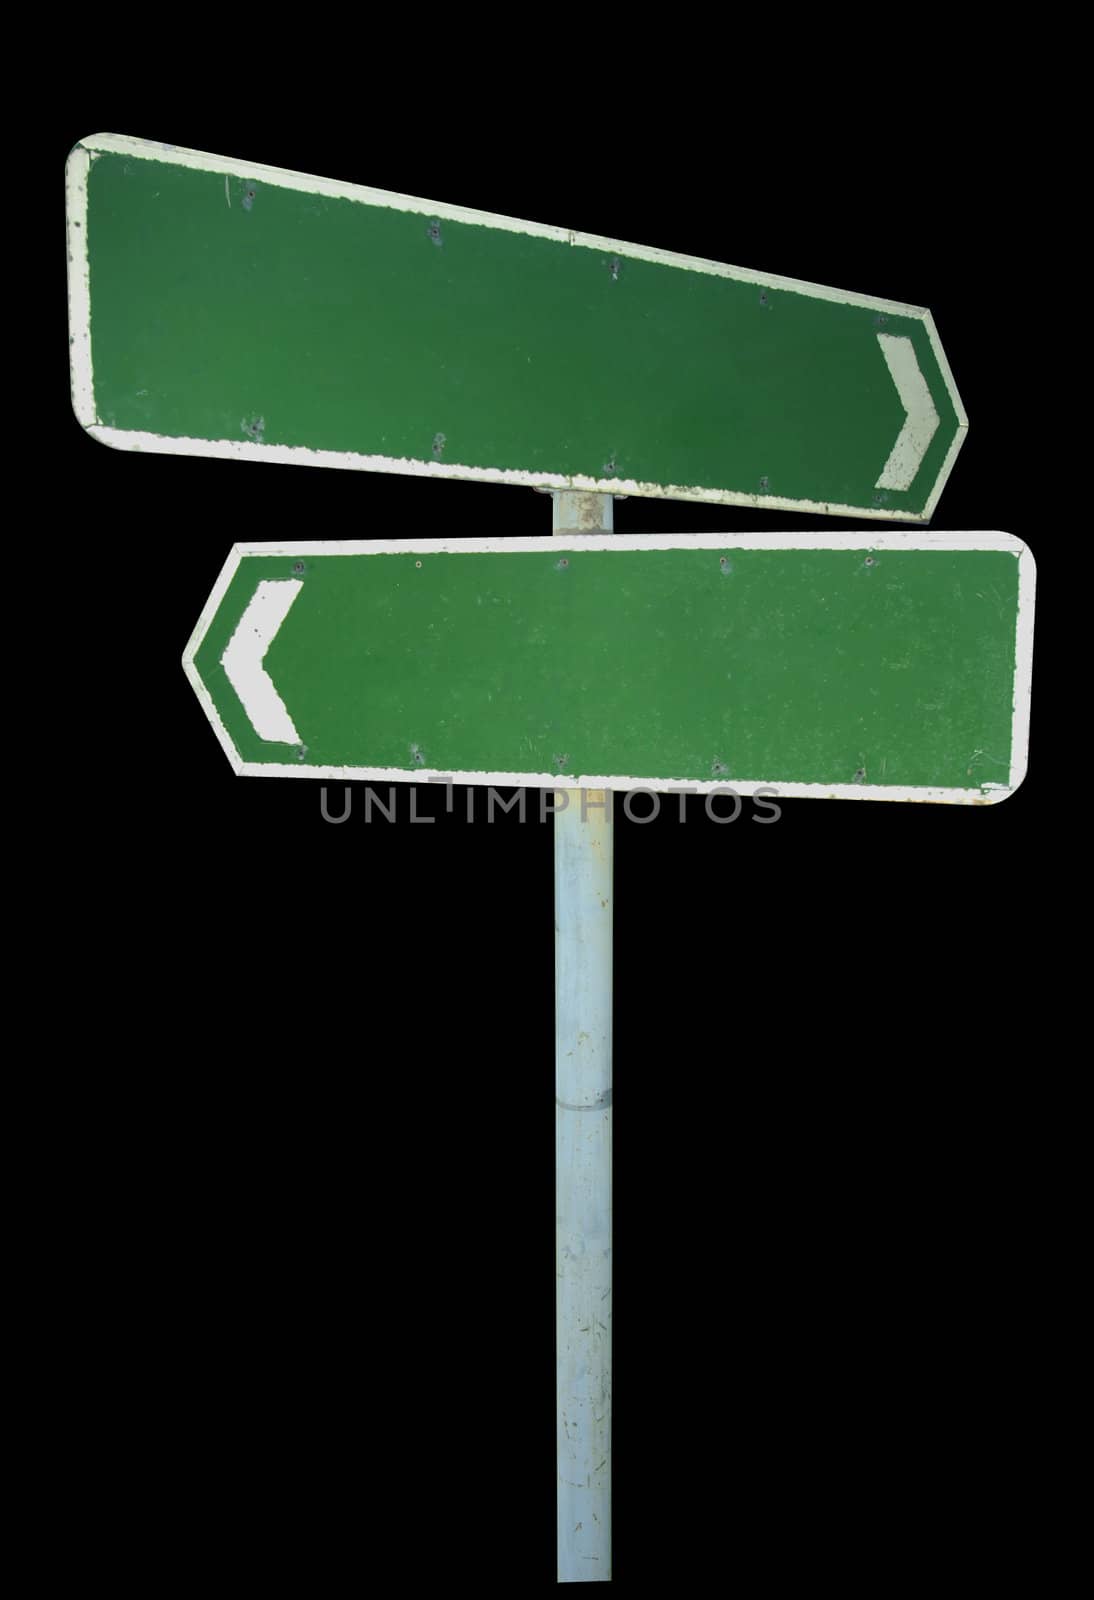 Grungy green signs (Clipping path included) by Bateleur